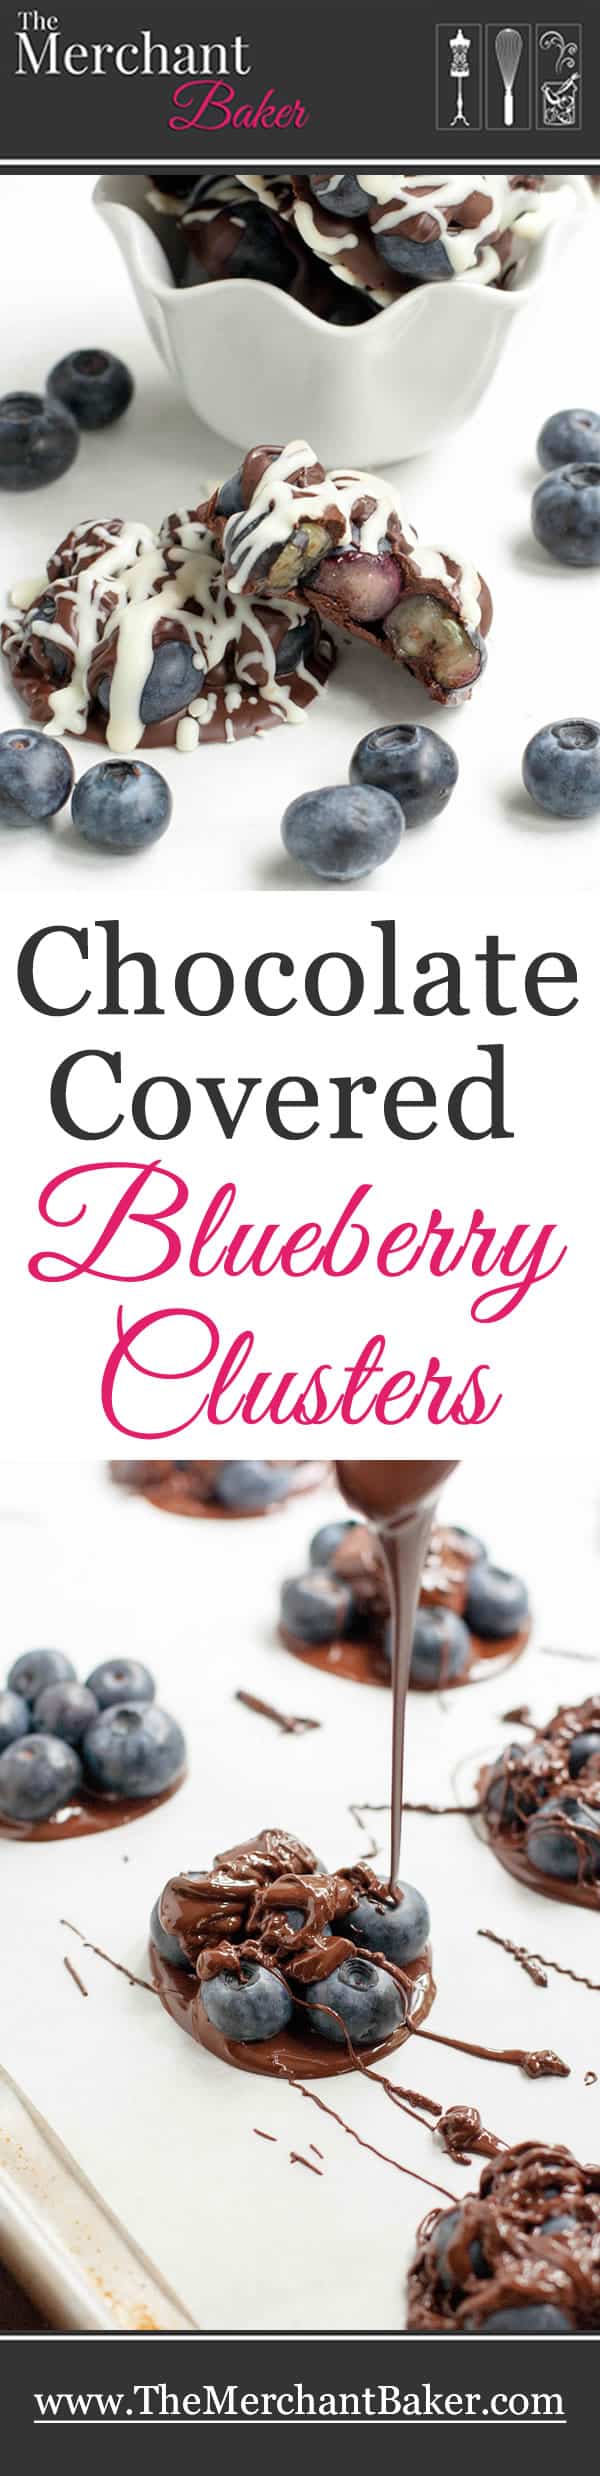 chocolate covered blueberry clusters